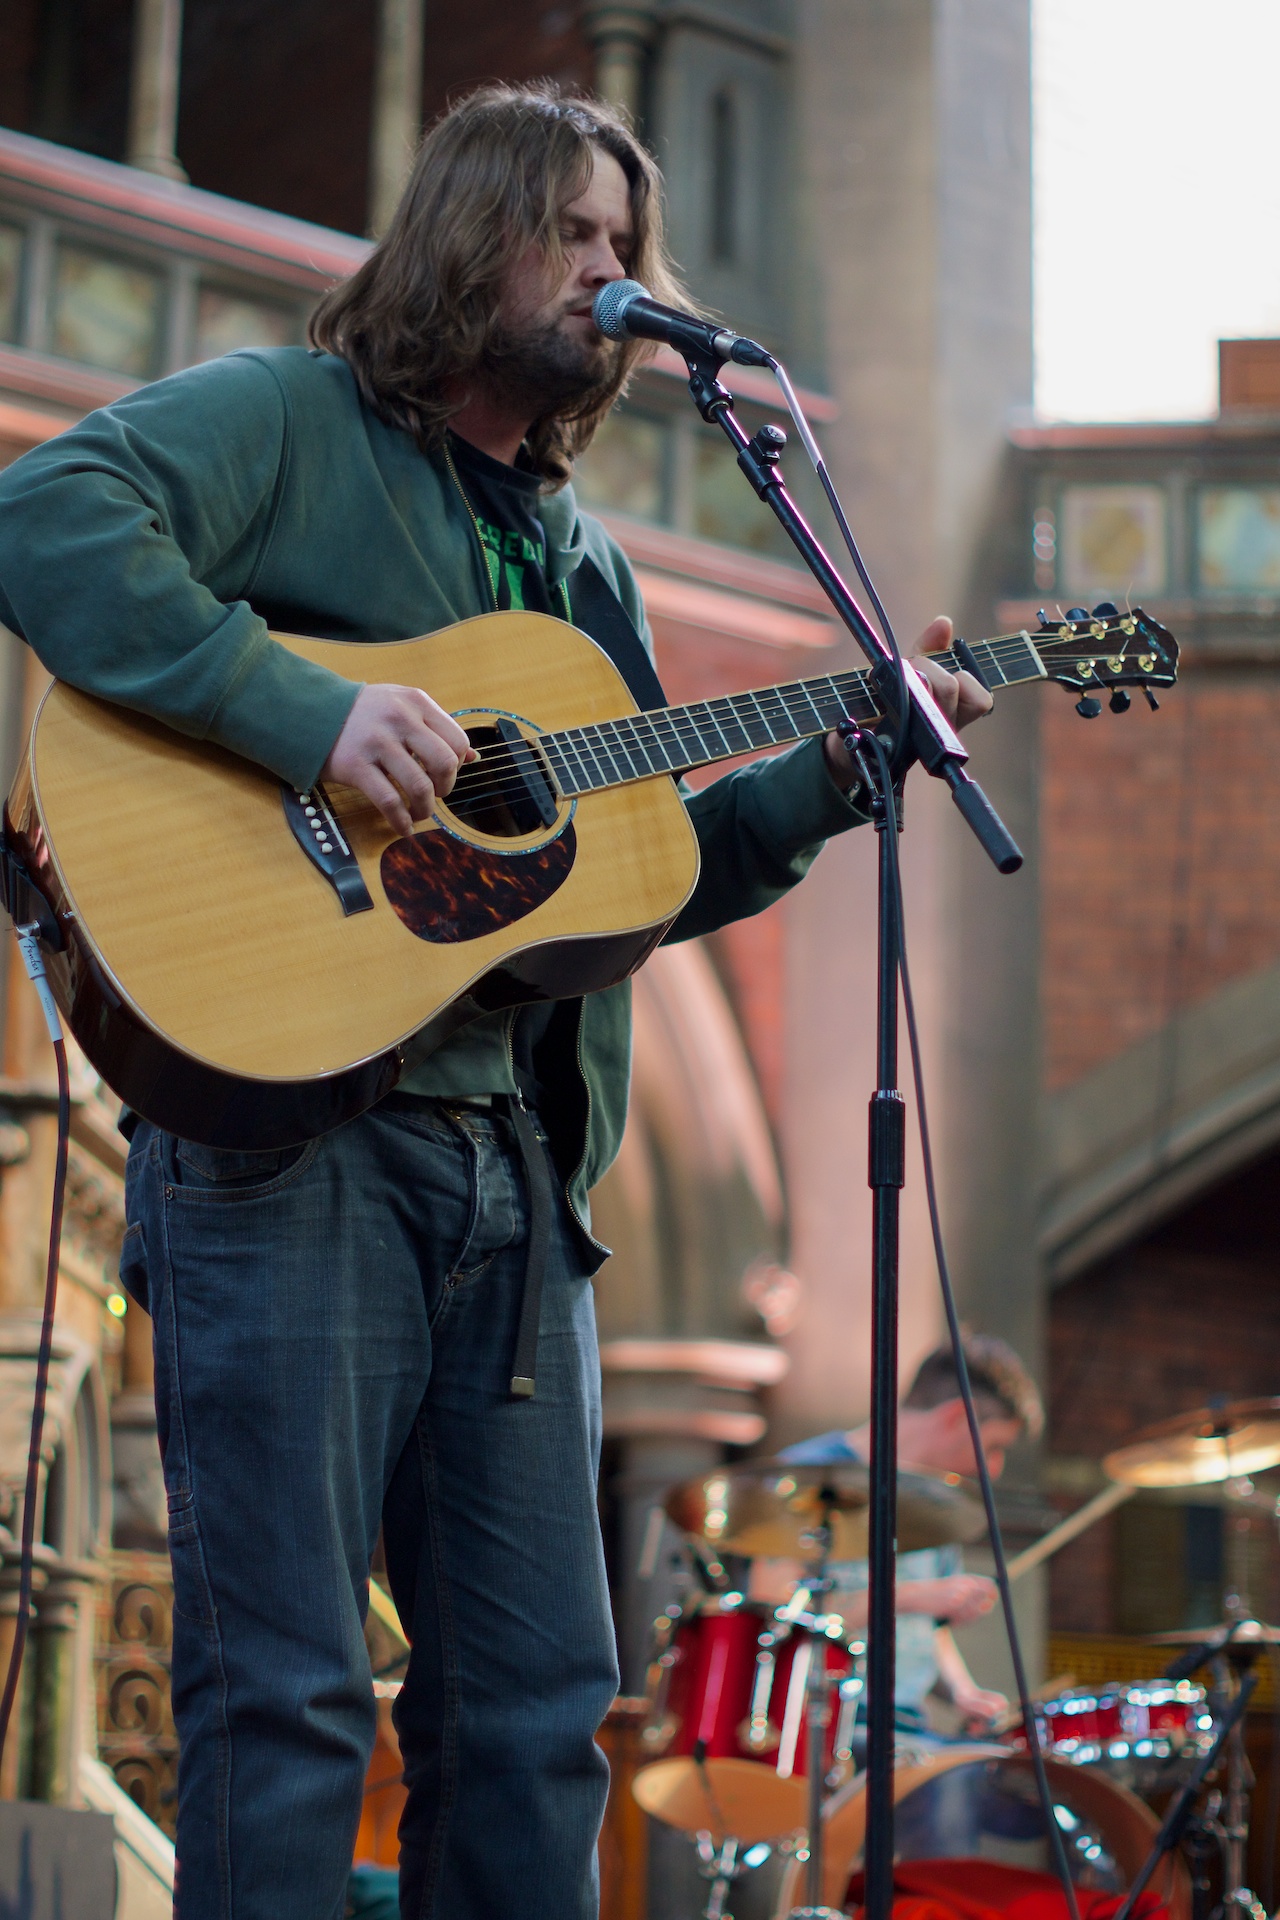 man playing guitar near a microphone and brick building